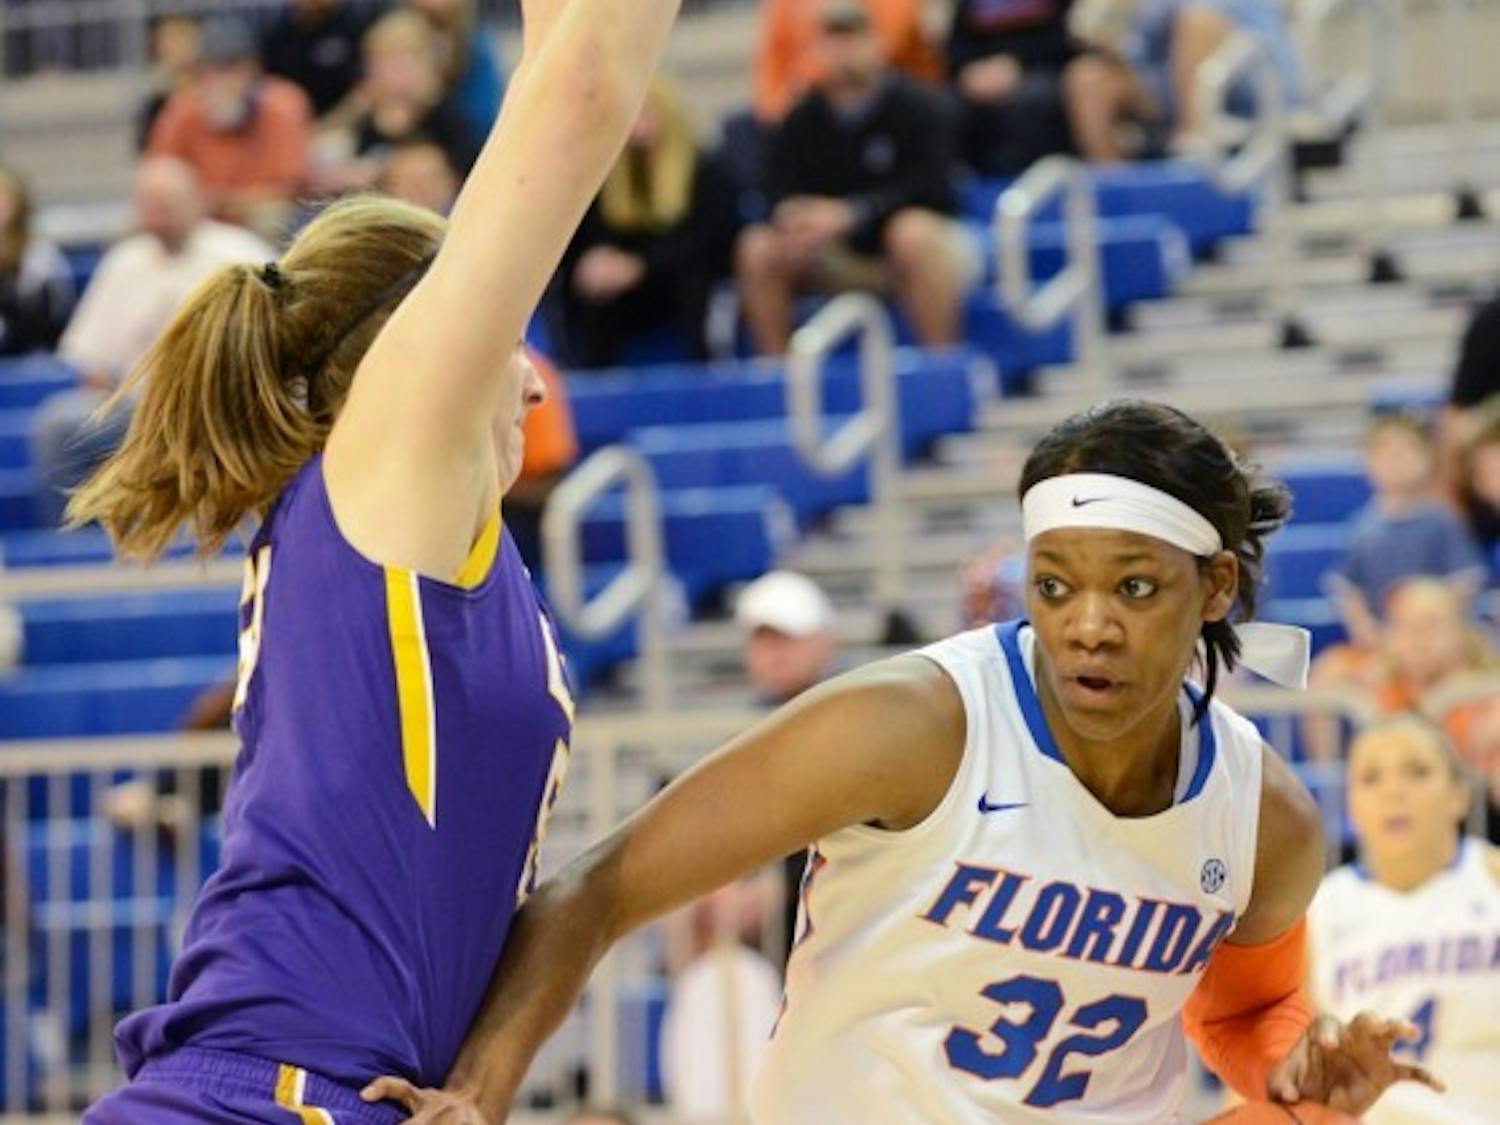 Senior forward Jennifer George dribbles in the lane during Florida's 77-72 win against LSU in the O'Connell Center.&nbsp;